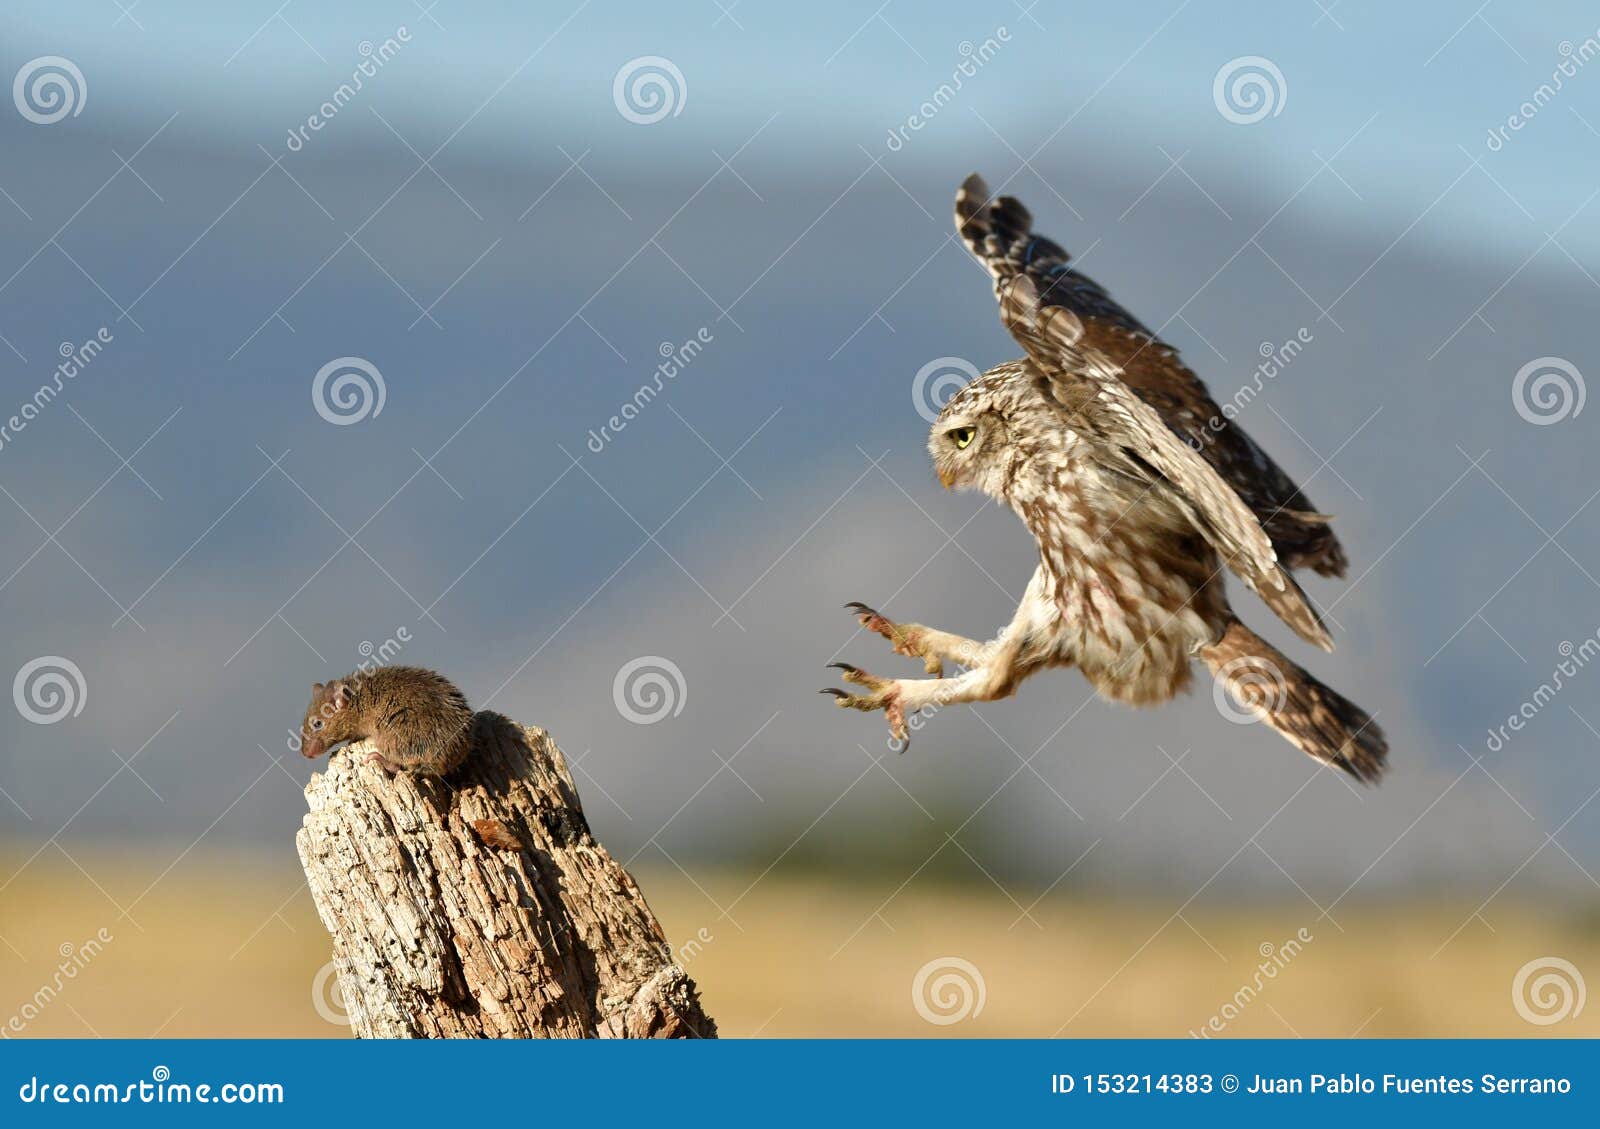 little owl comes to his innkeeper for a prey